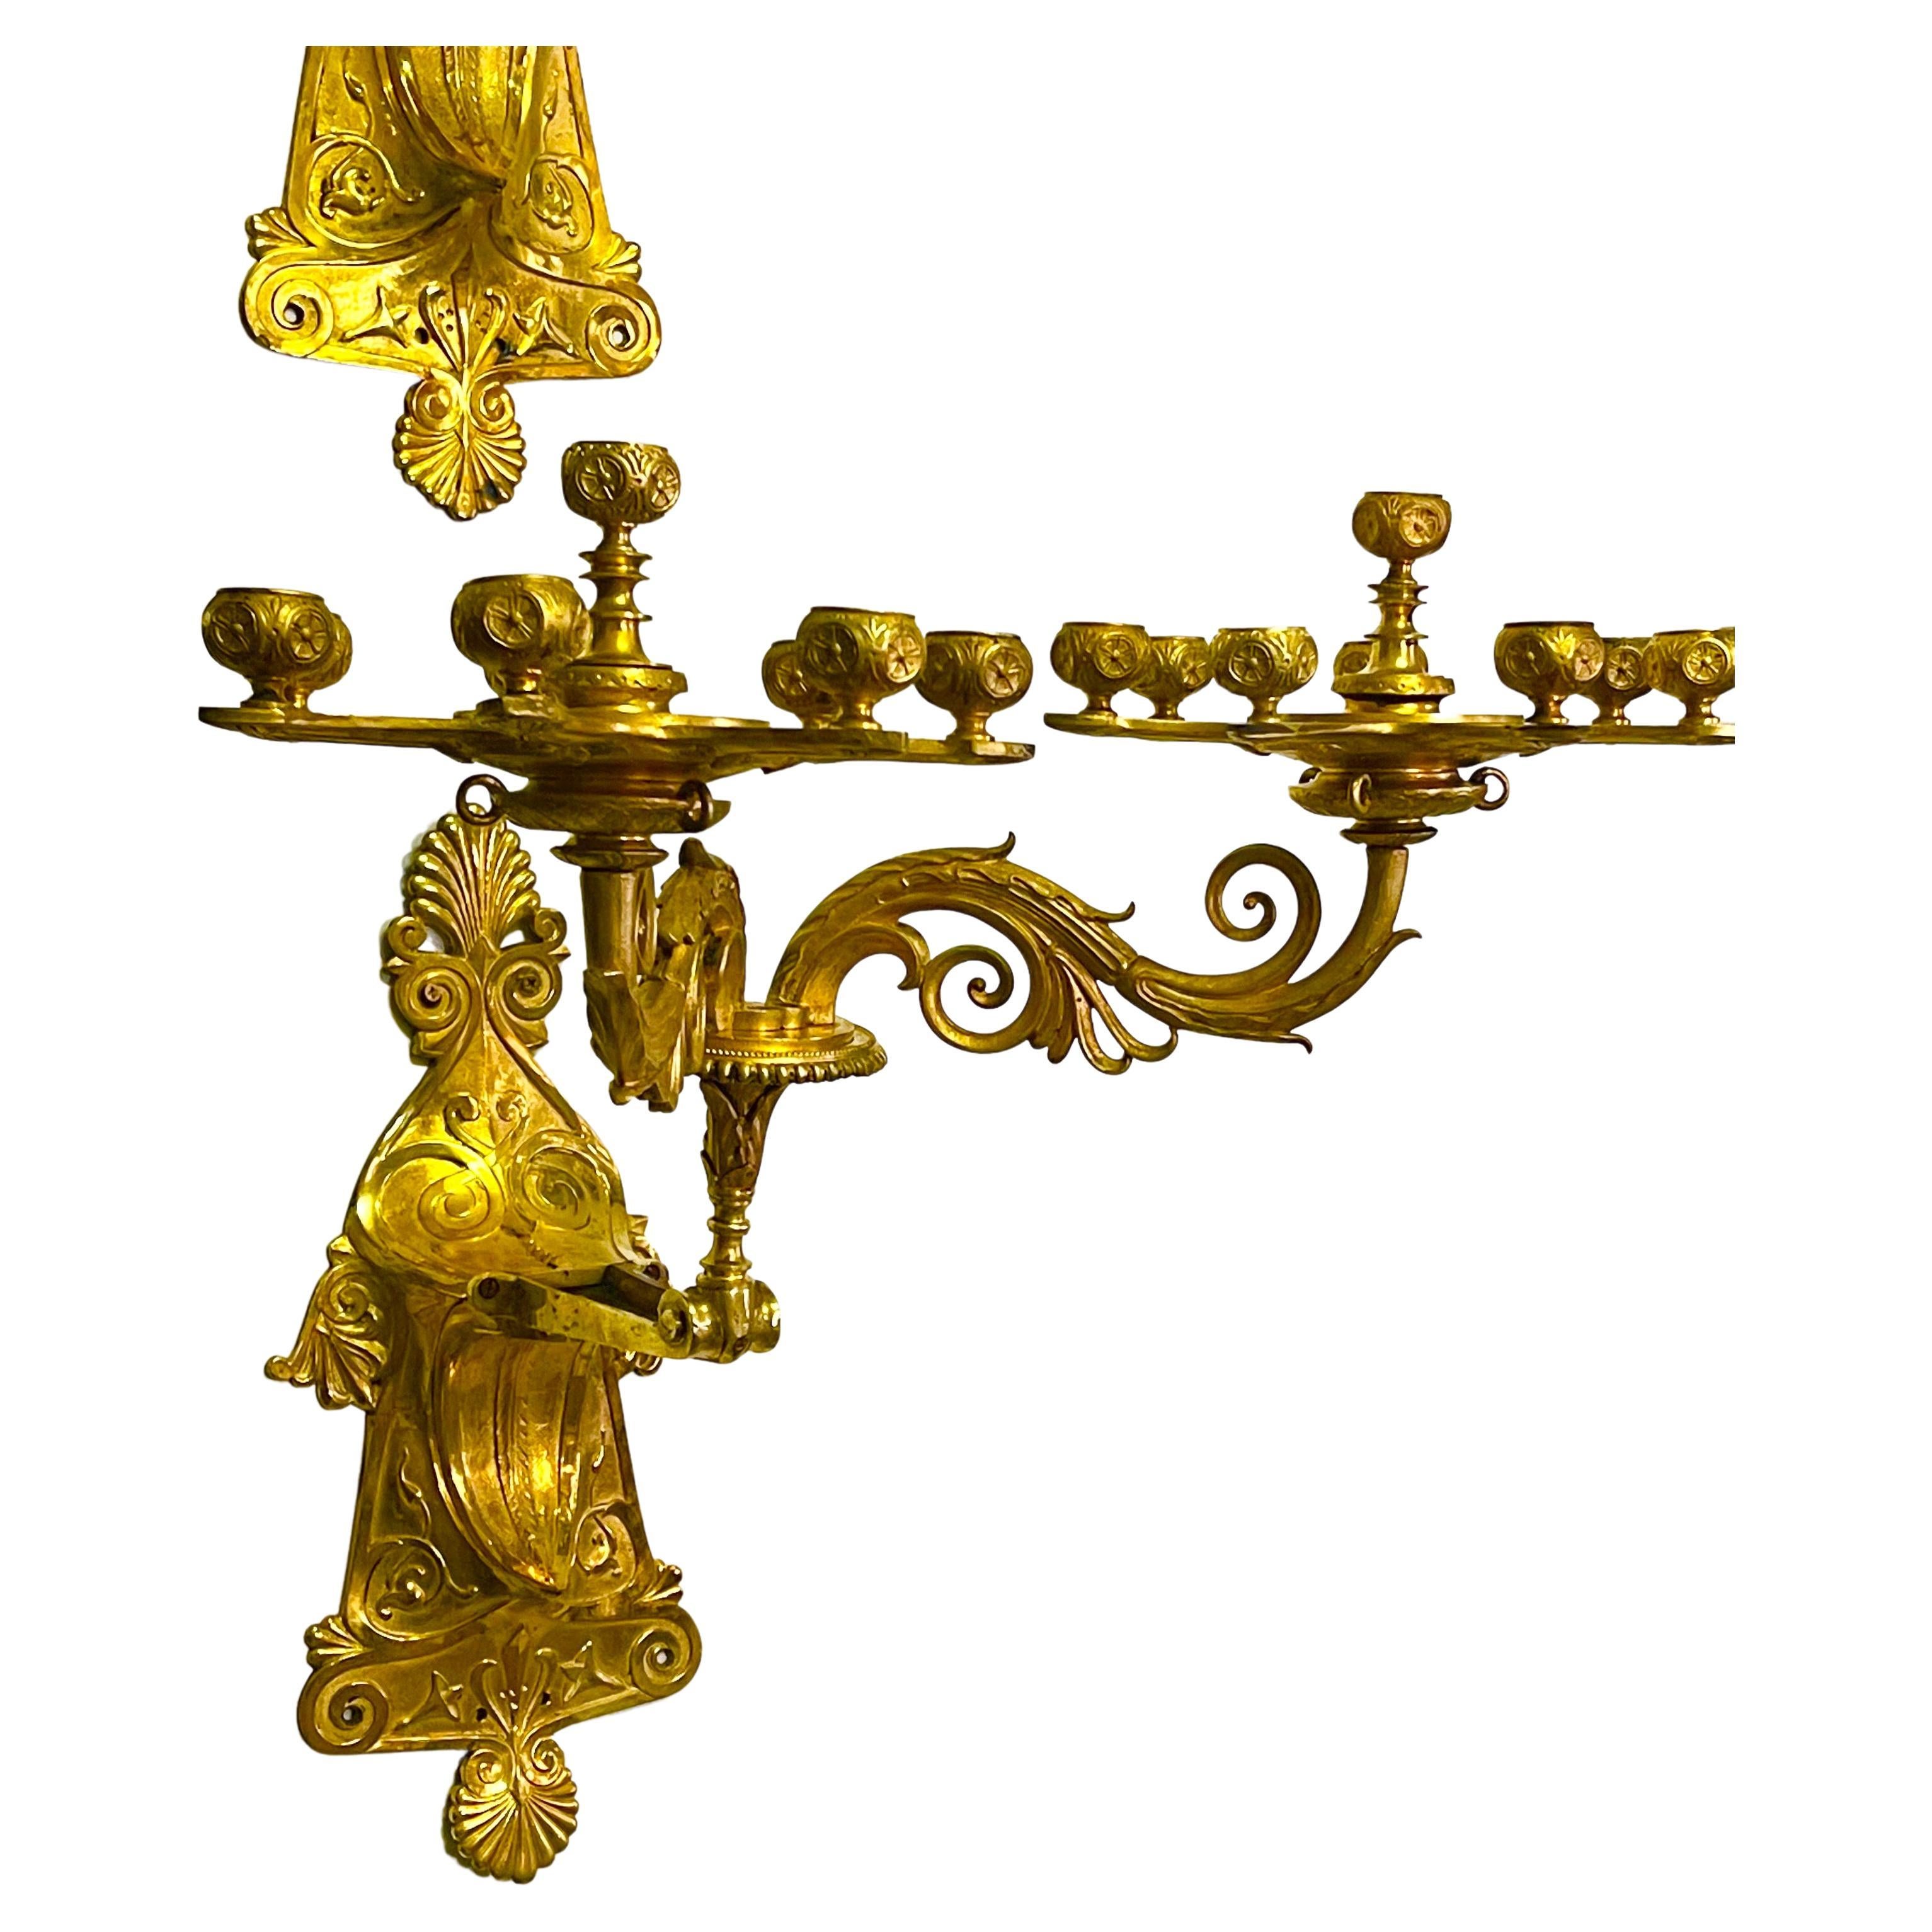 Unknown Pair of Stunning Russian Empire Period Ormolu Wall Sconces , ca. 1820s For Sale